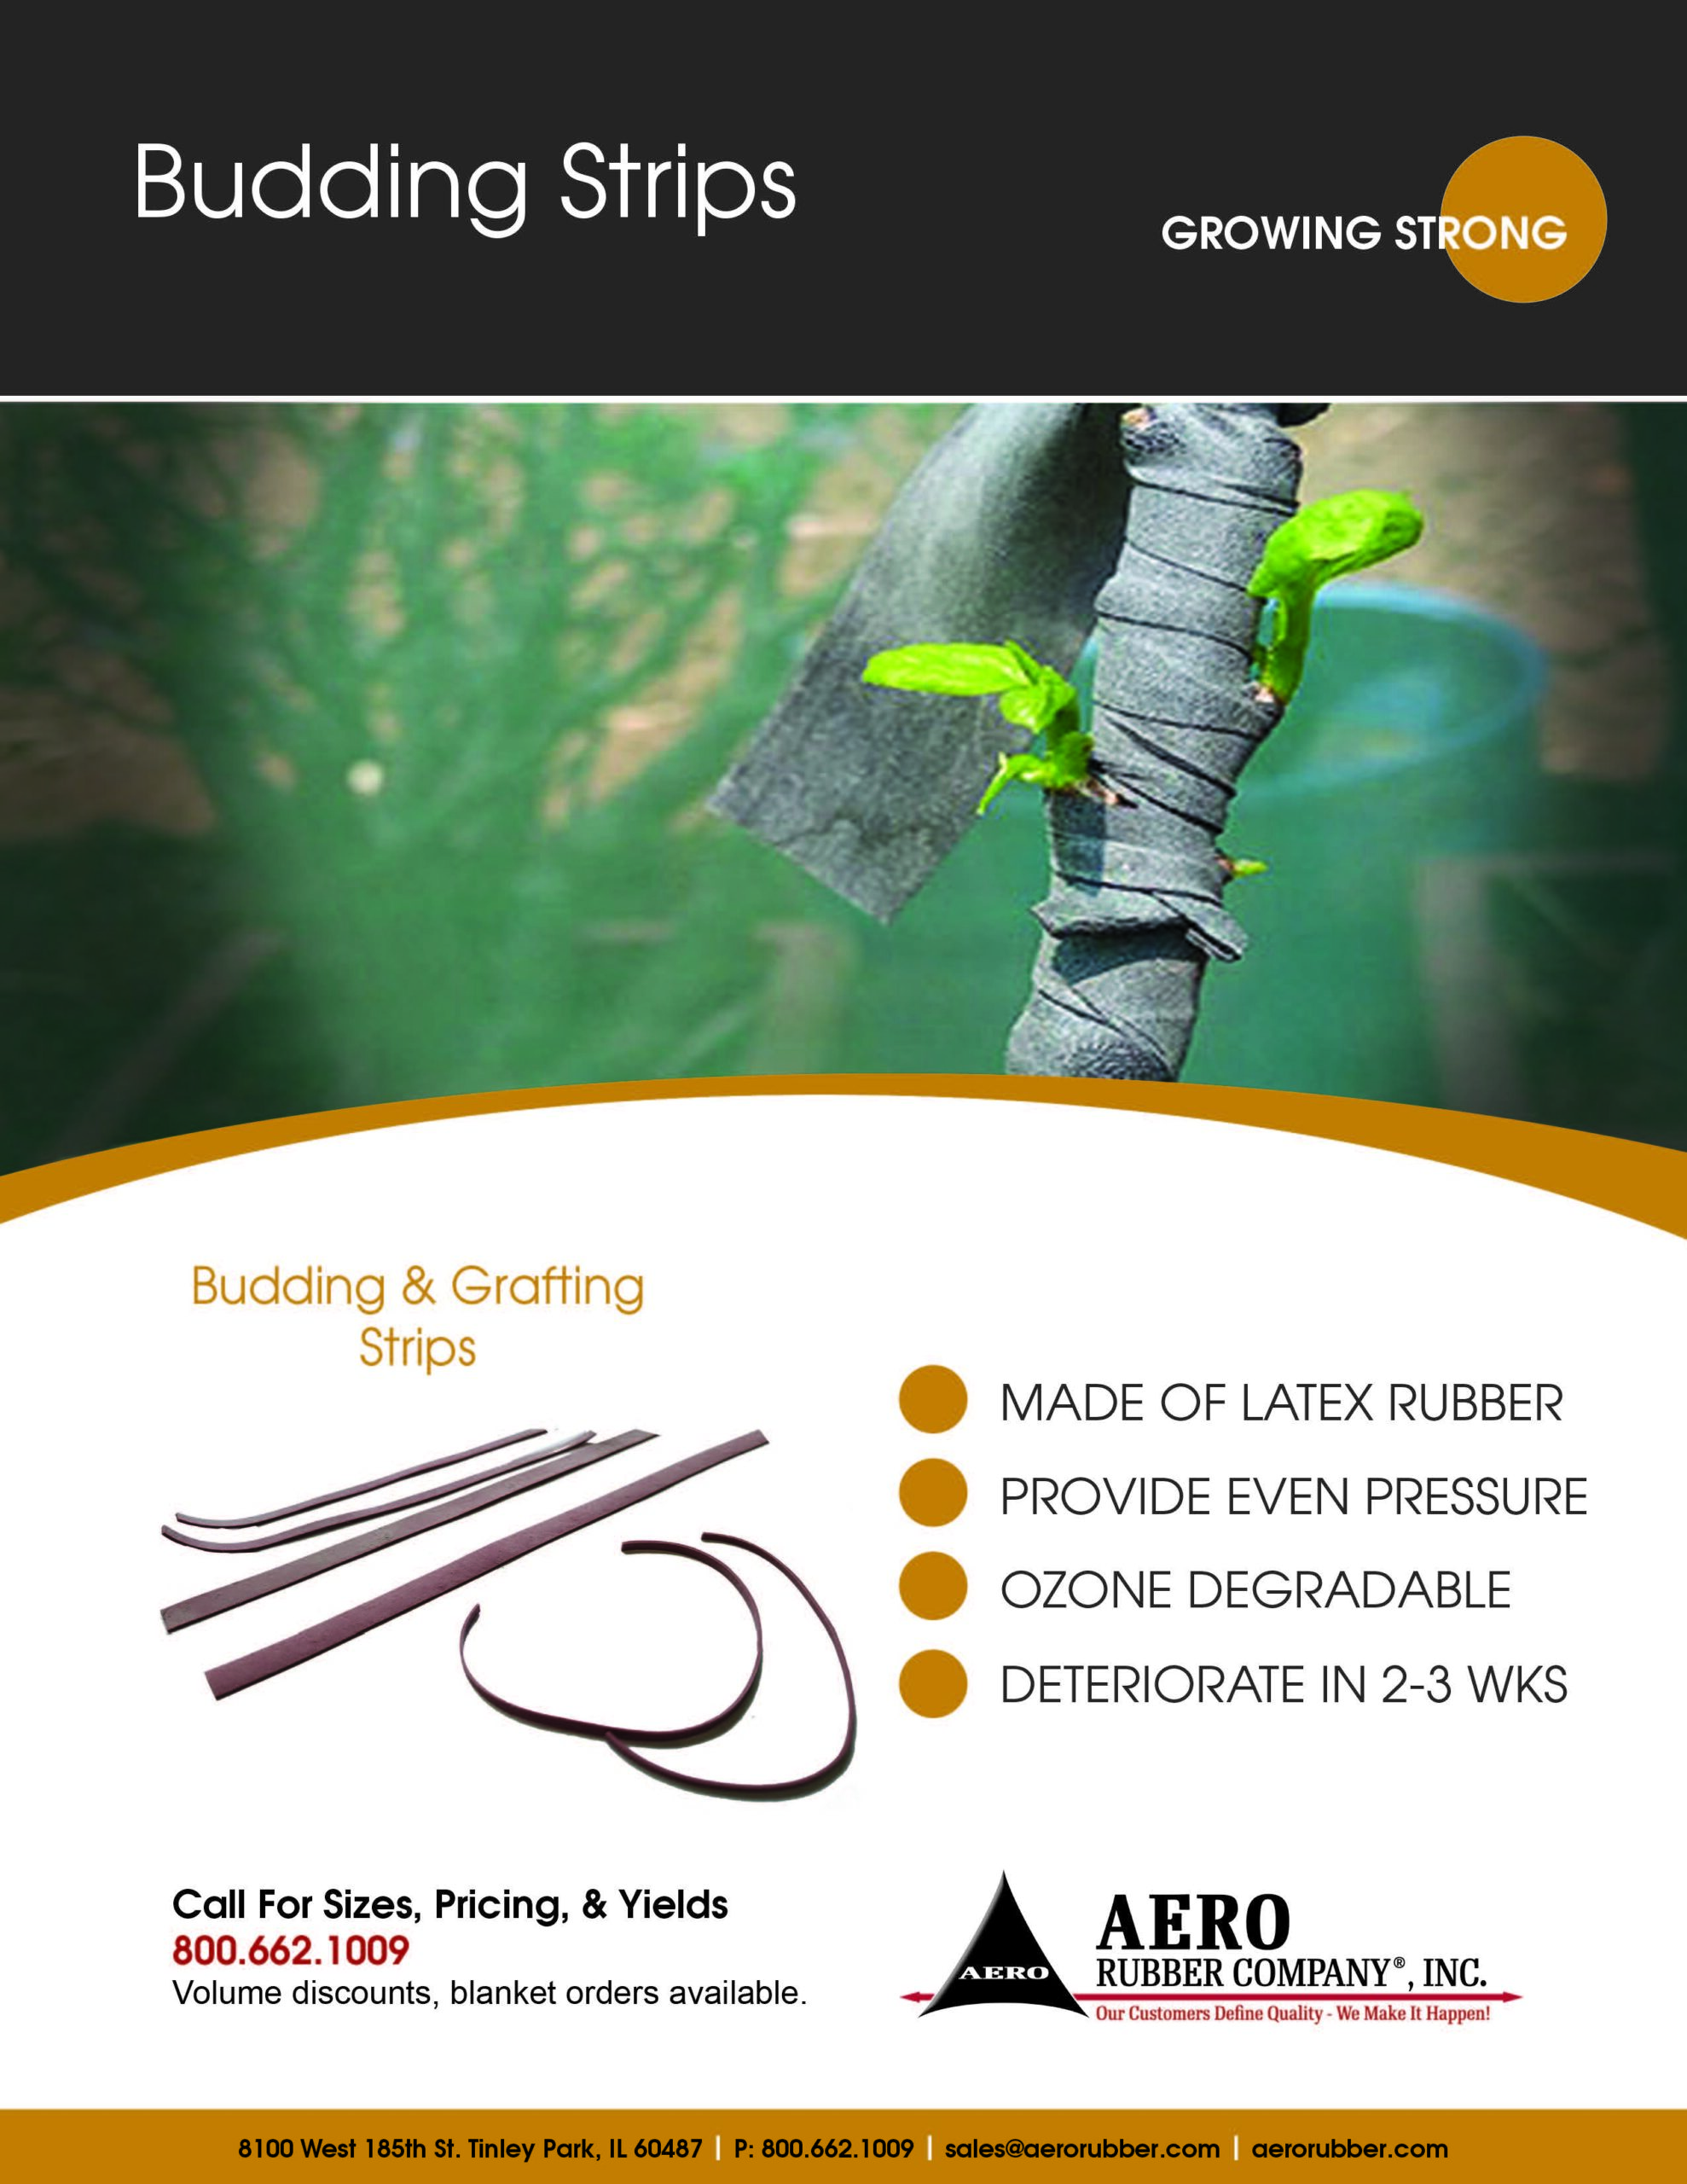 Rubber Budding Strips by Areo Rubber Company